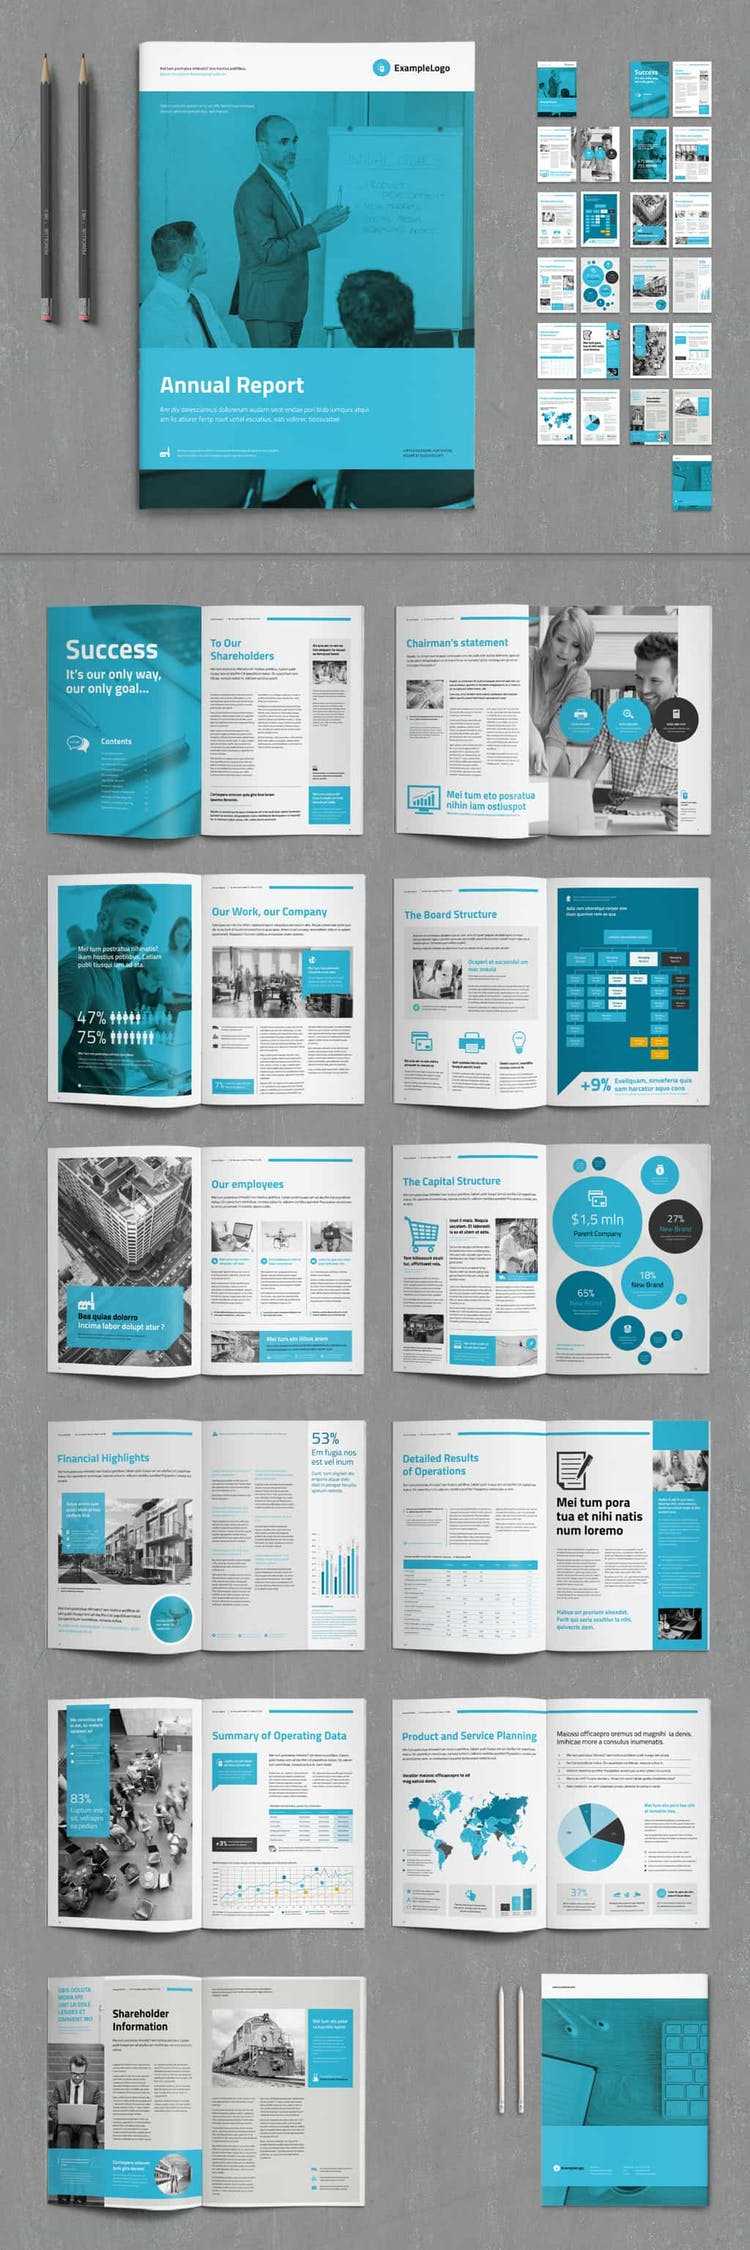 60 Best Annual Report Design Templates For Chairman's Annual Report Template